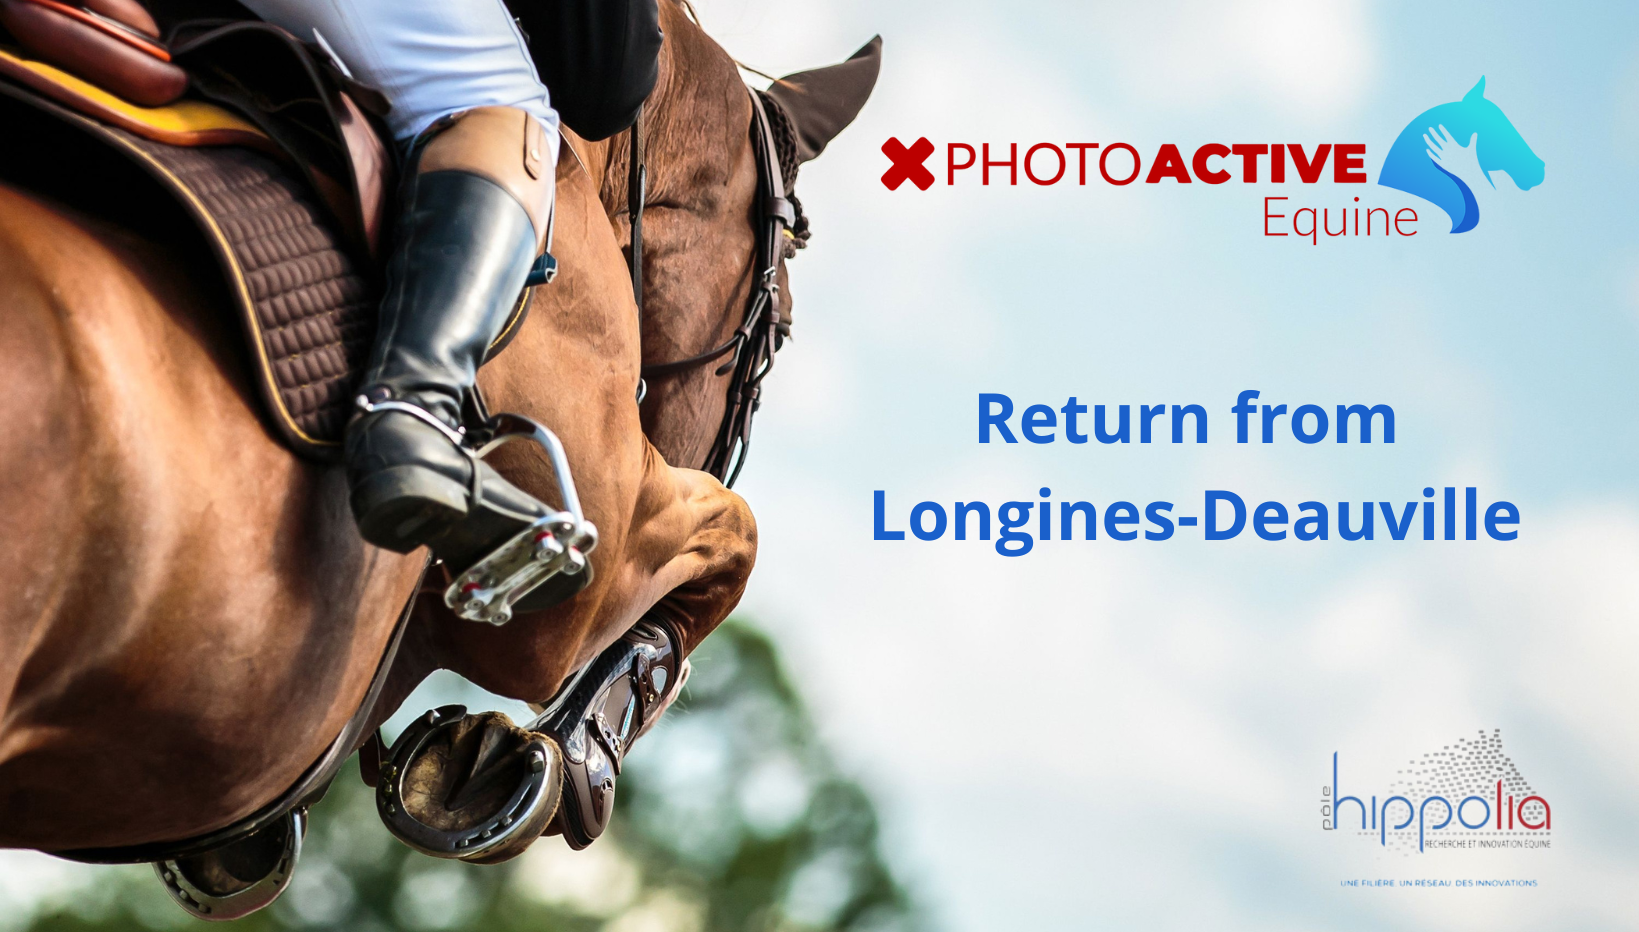 PhotoACTIVE Equine Back from Longines-Deauville!